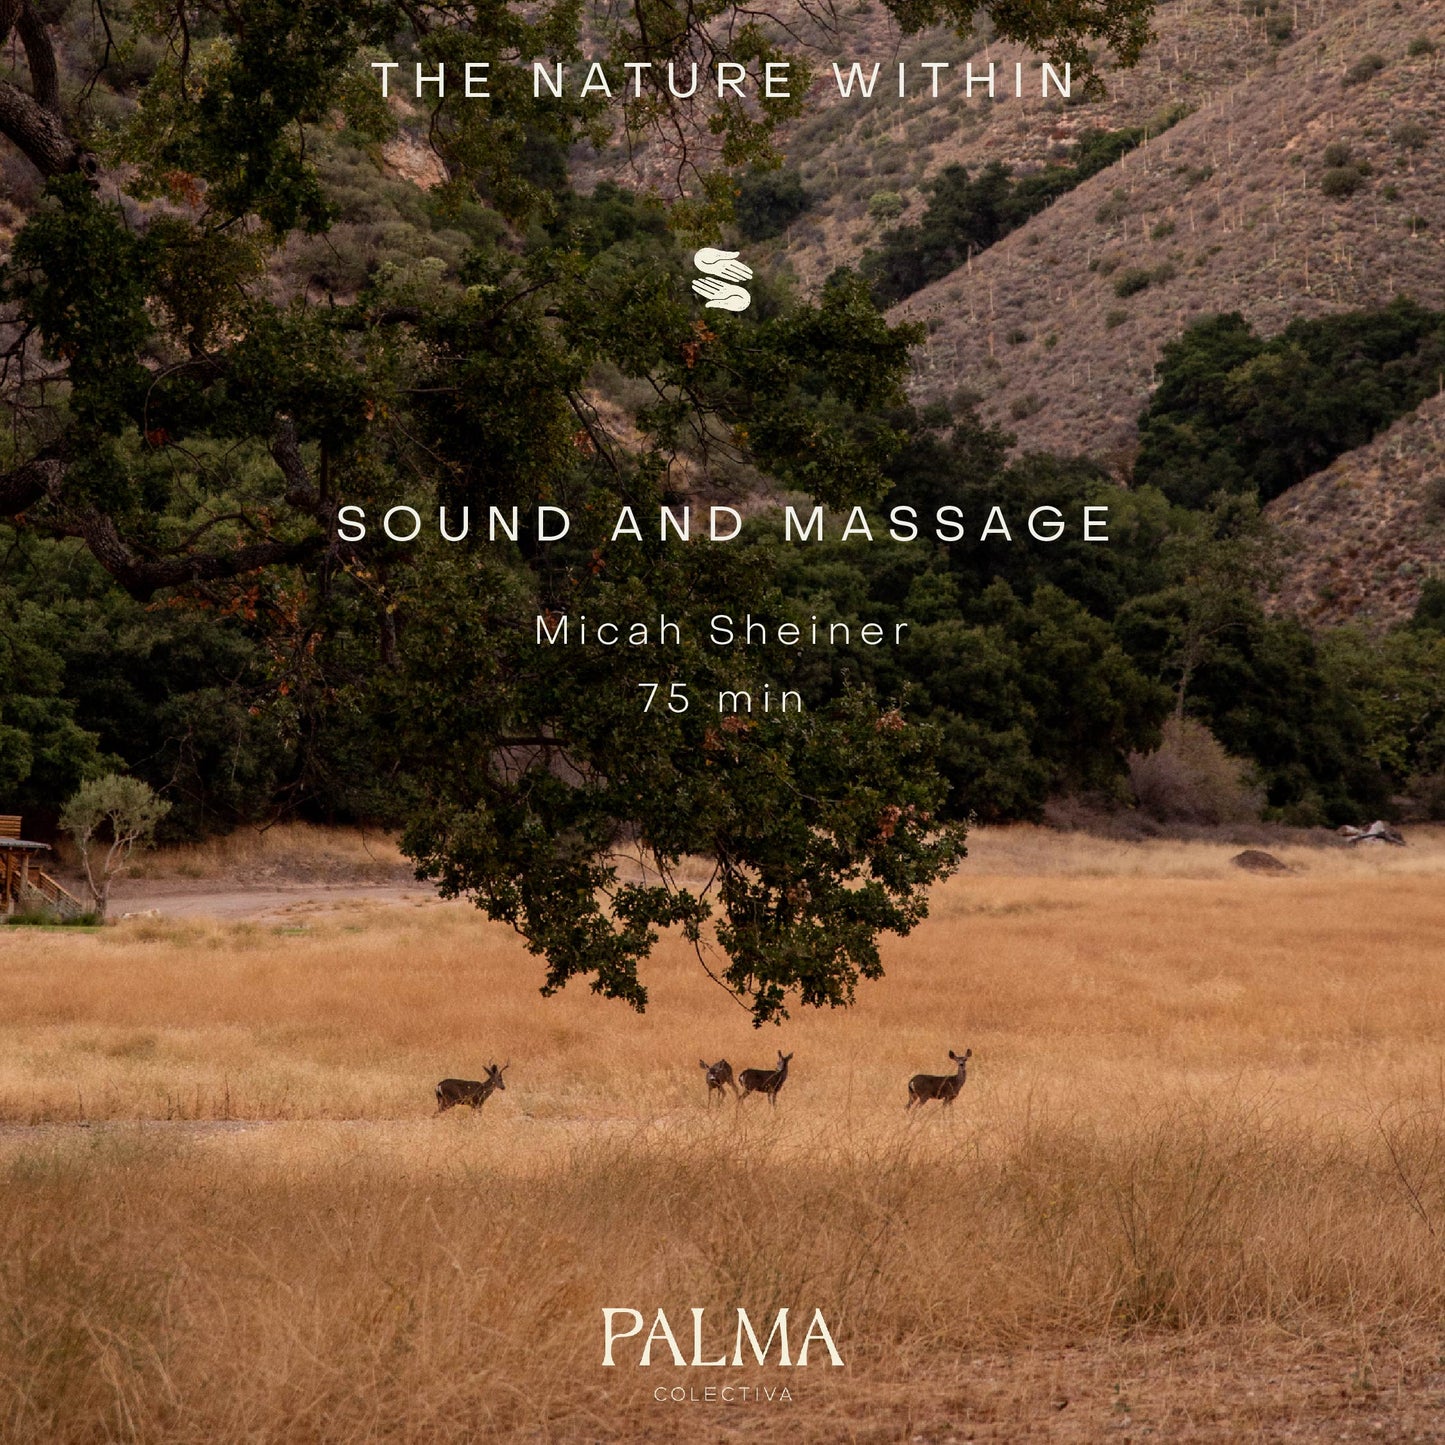 Sound and Massage (75 min) with Micah Sheiner at THE NATURE WIHIN RETREAT